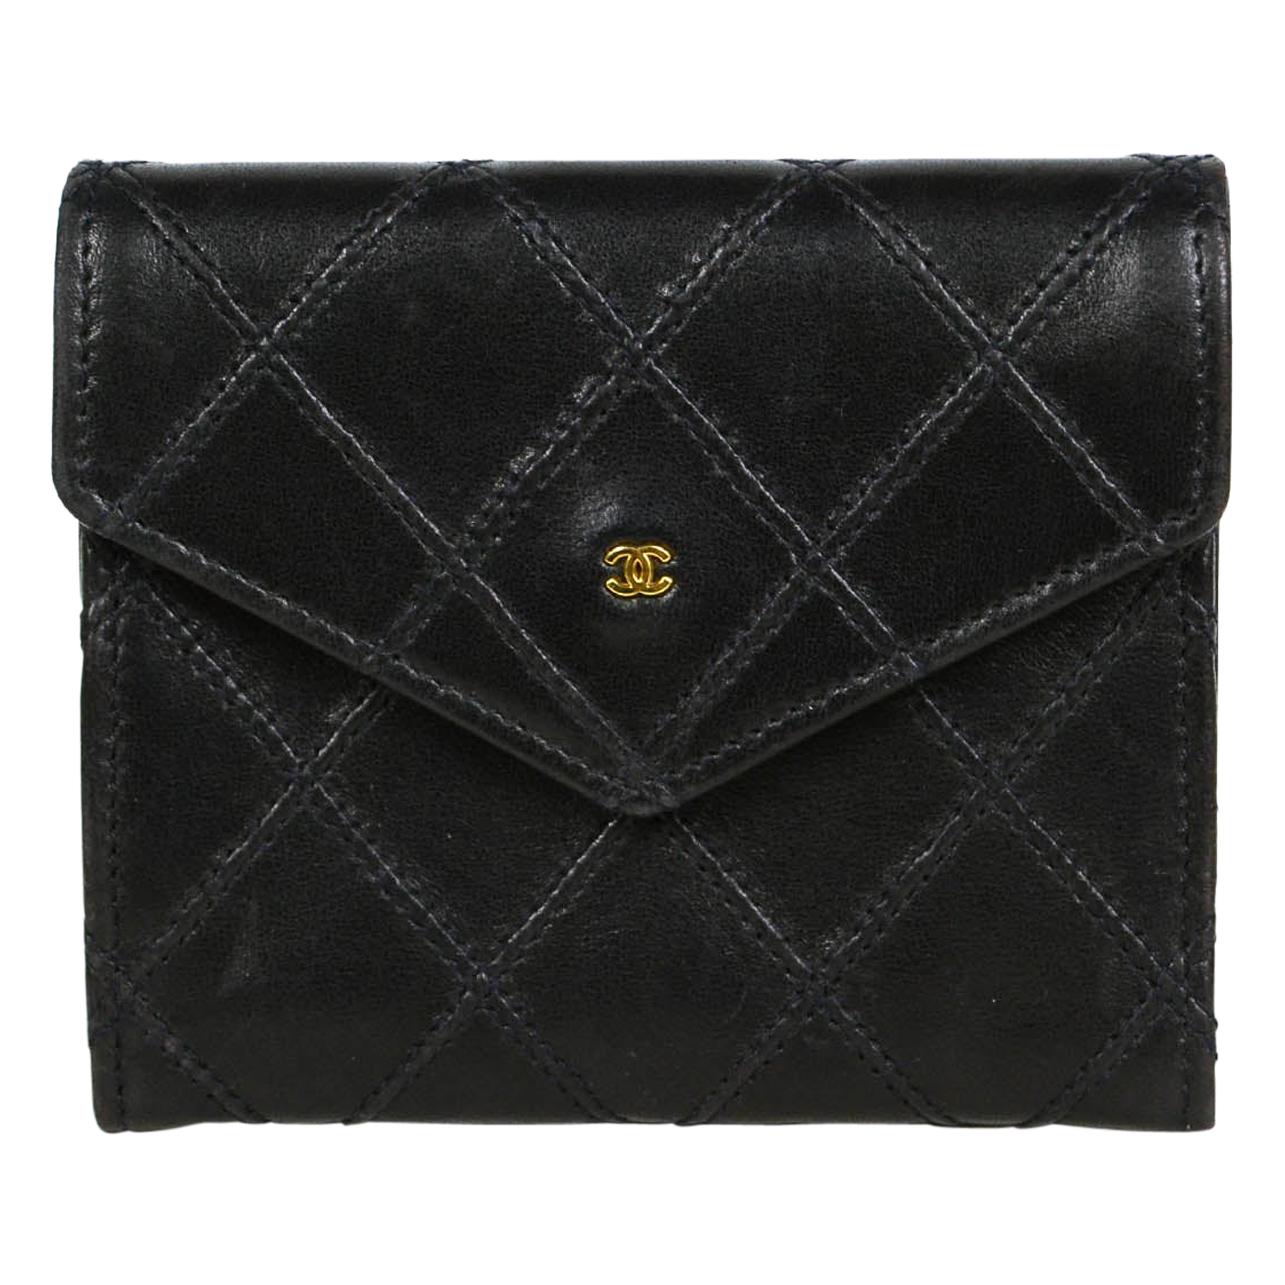 Chanel Black Vintage Lambskin Leather Quilted Card Case Wallet